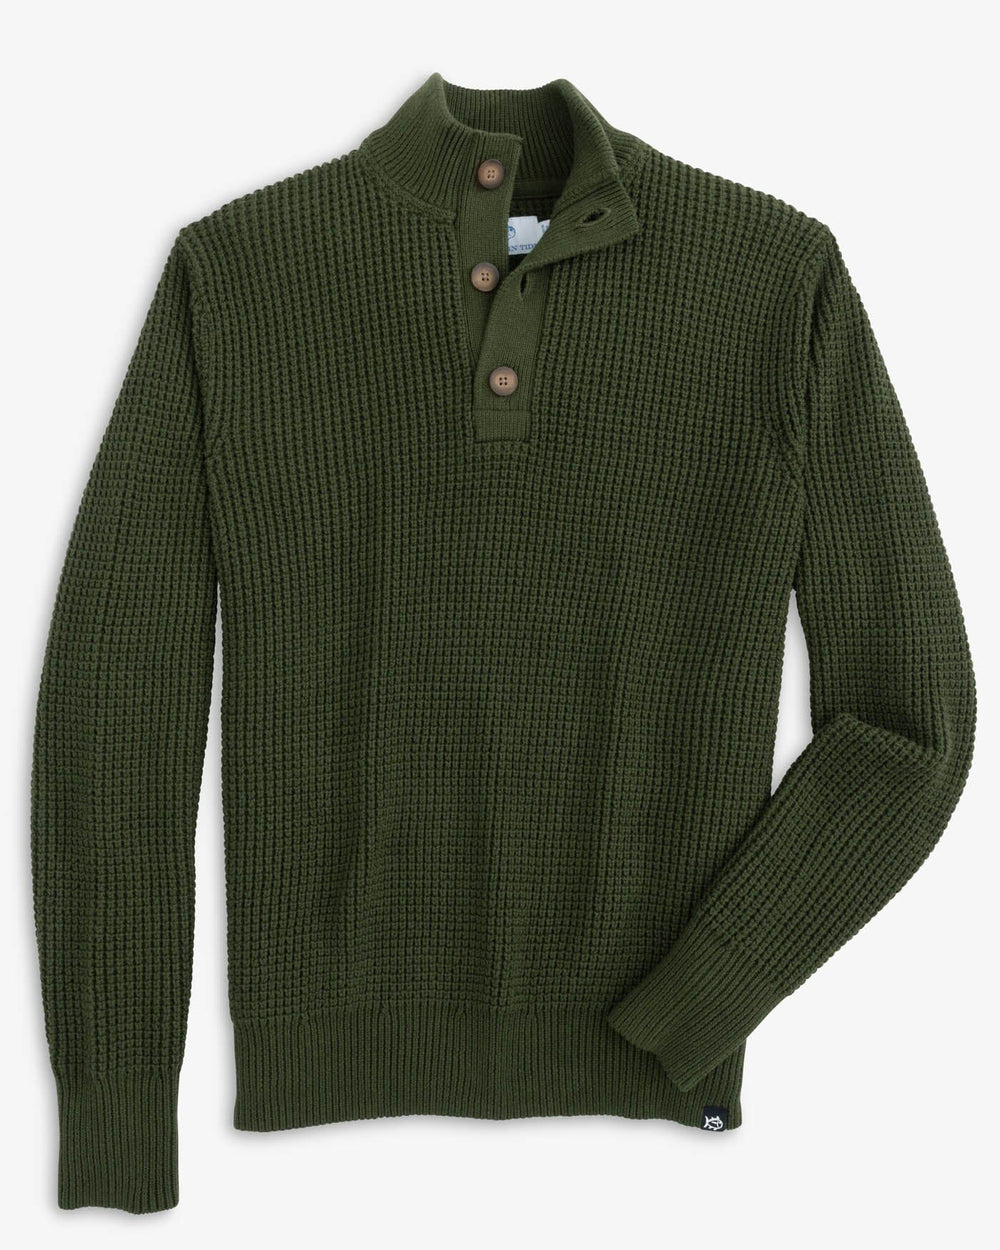 The front view of the Southern Tide Westmont Heather Jade Quarter Zip Button by Southern Tide - Heather Gulf Green